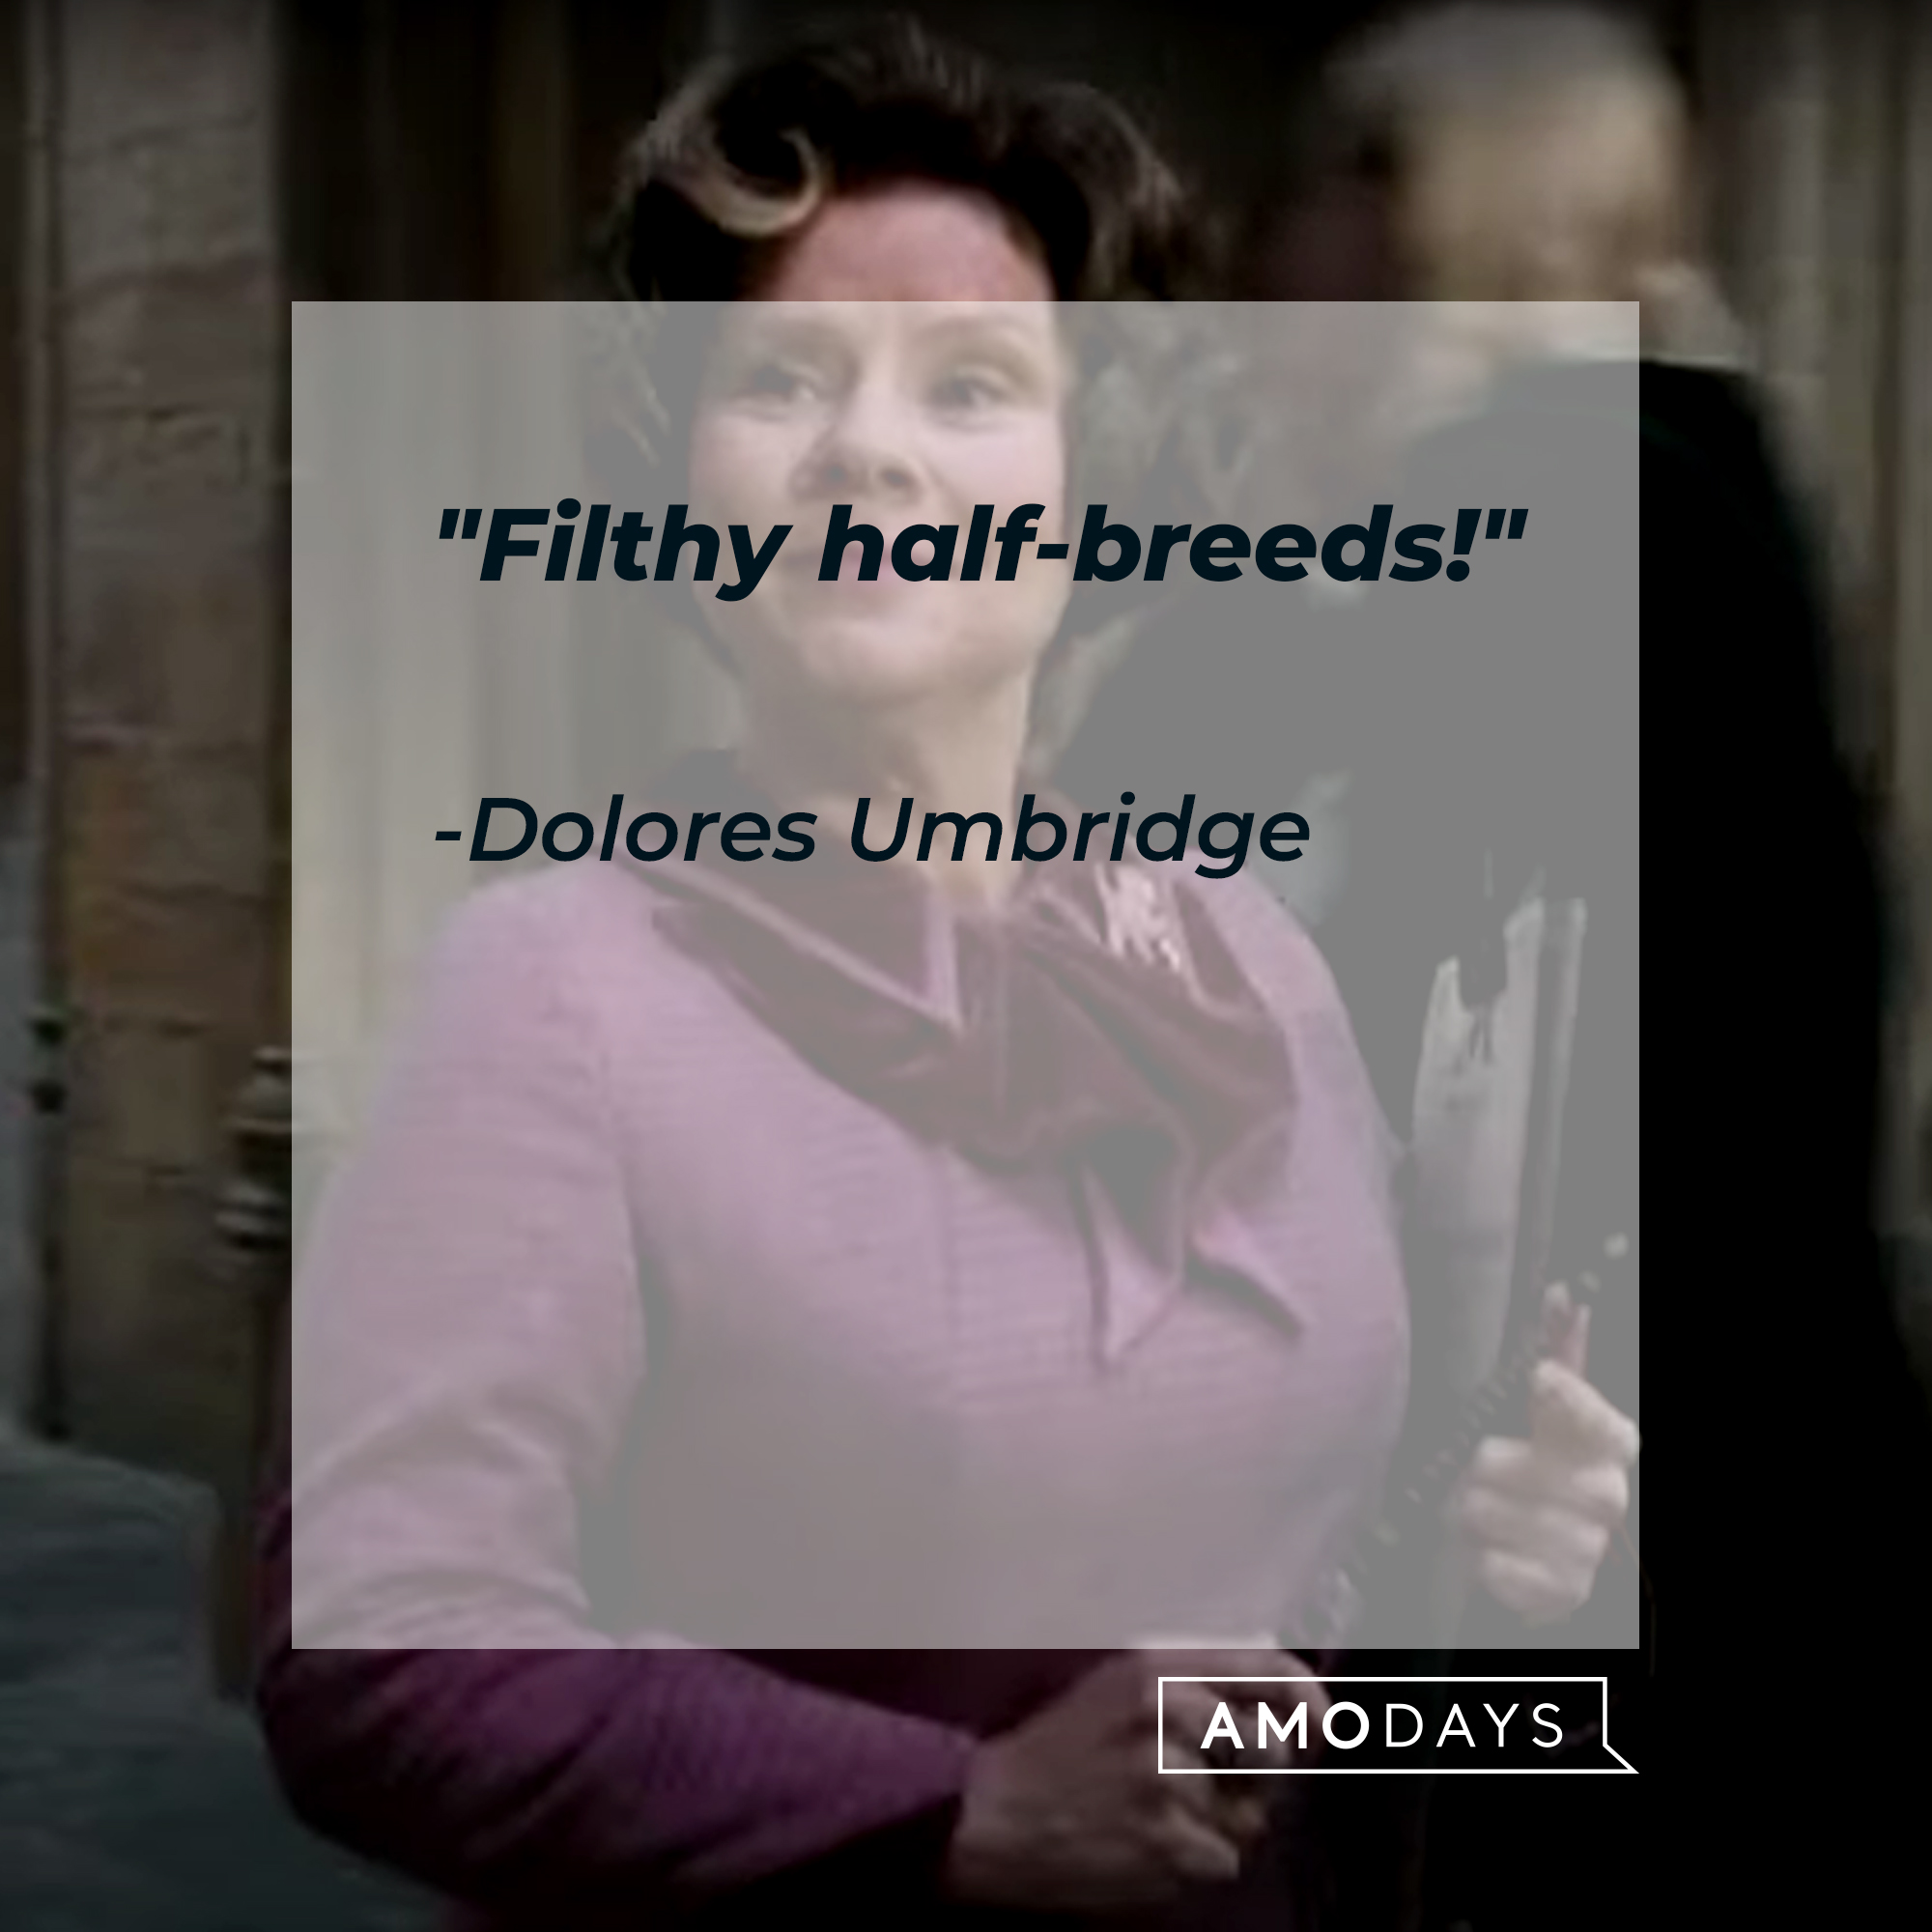 A photo of Dolores Umbridge with the quote, "Filthy half-breeds!" | Source: Facebook/harrypotter